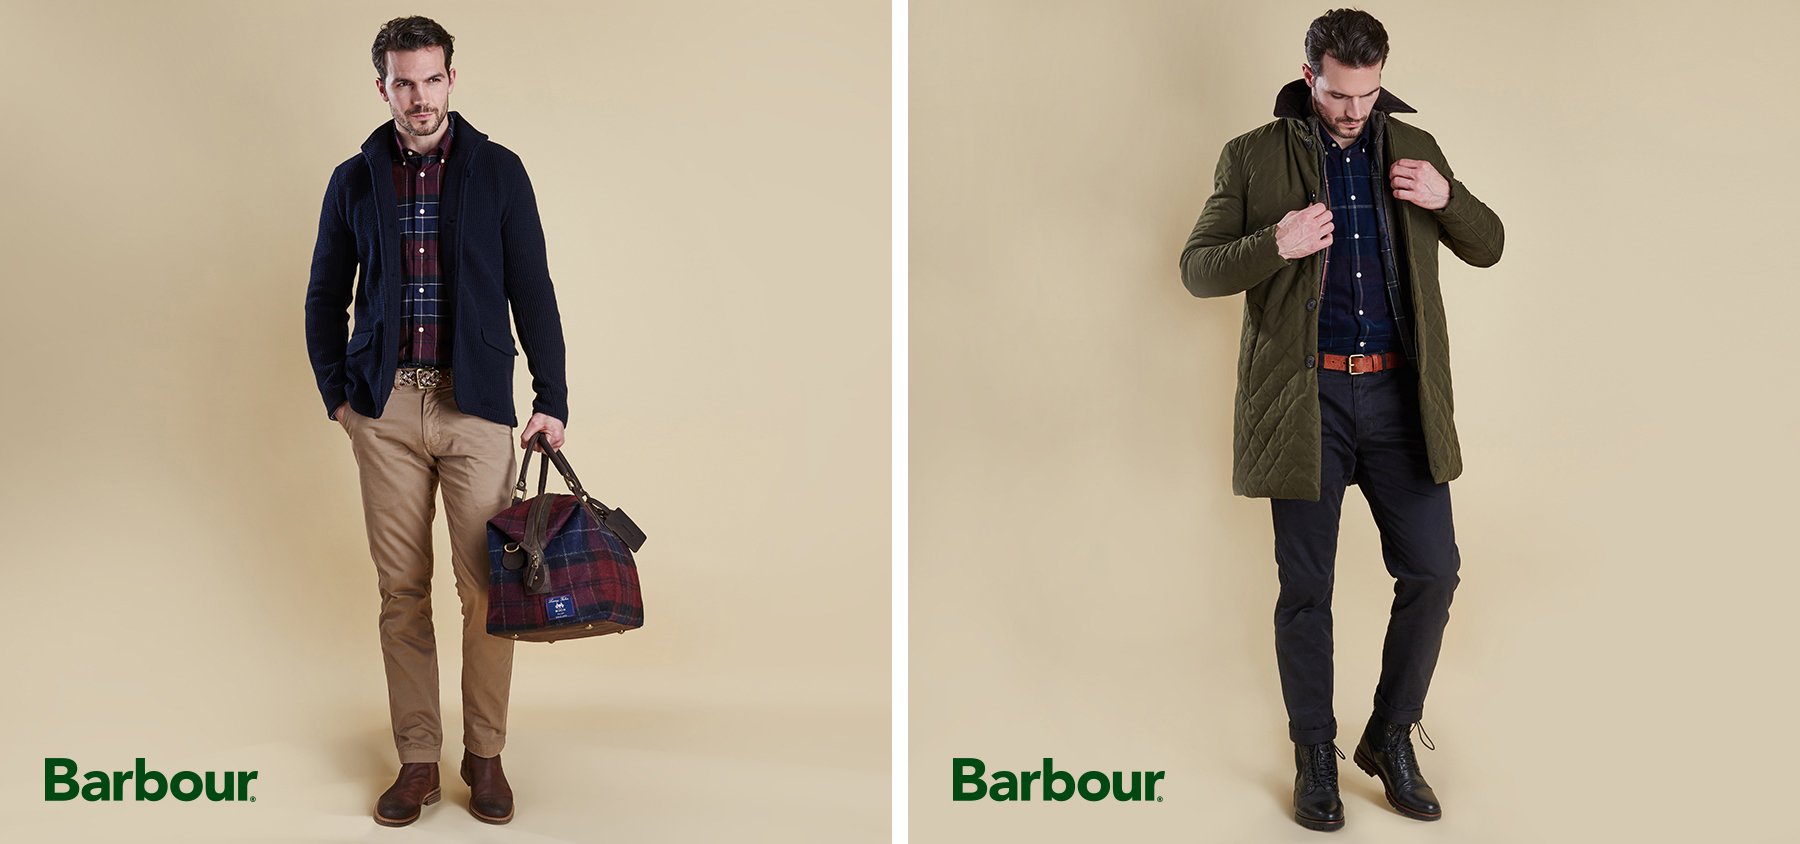 Barbour Classic Tartan Collection